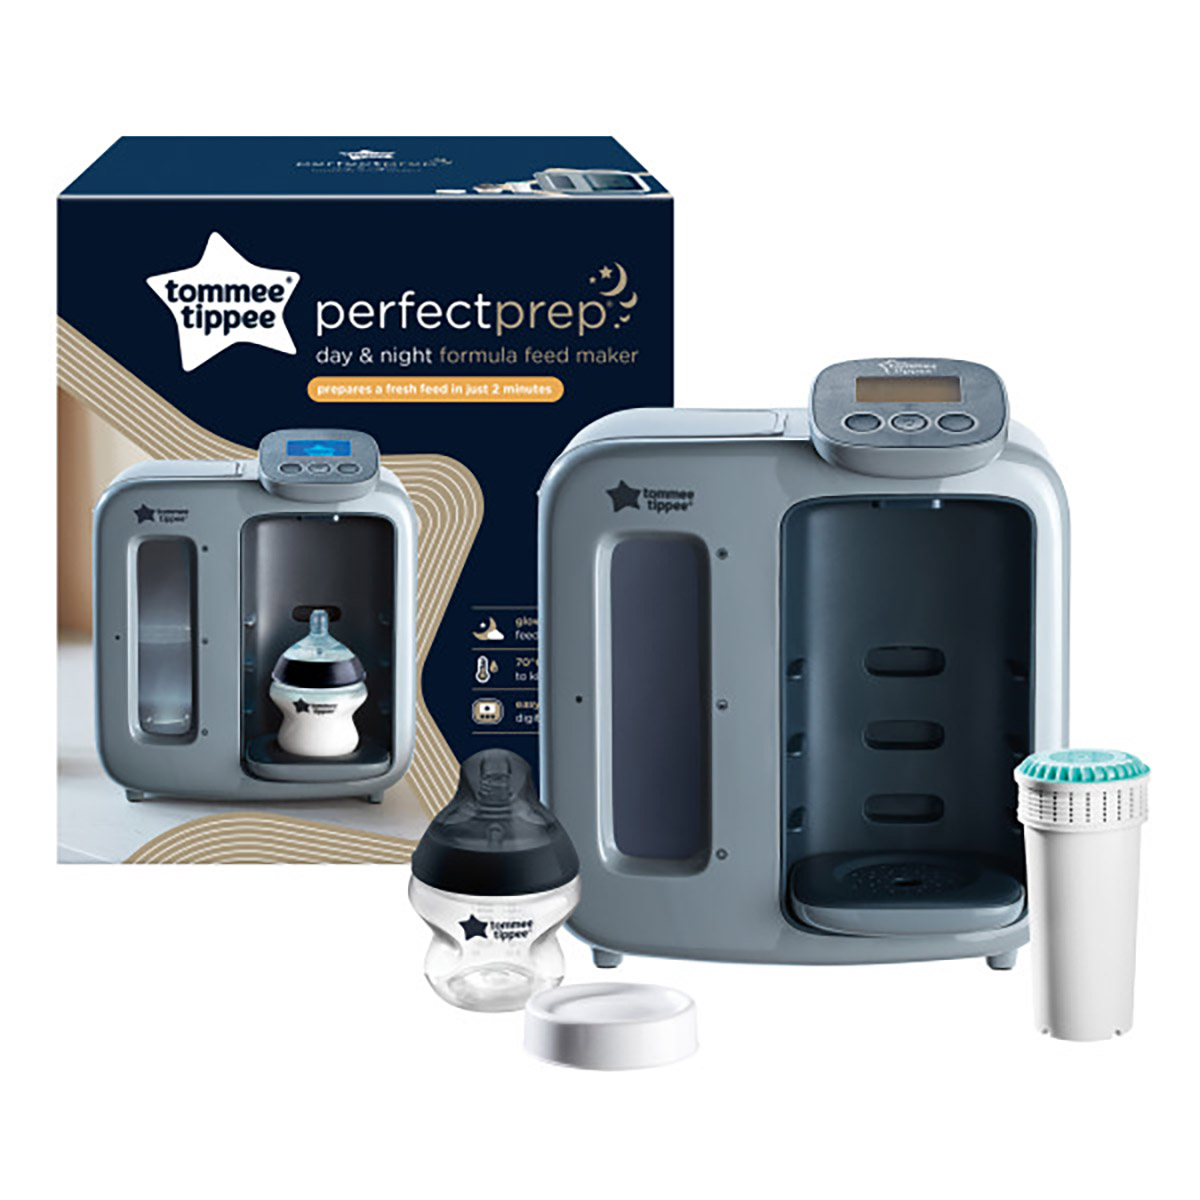 Tommee Tippee Perfect Prep Day & Night Machine Instant Baby Bottle Maker - Grey